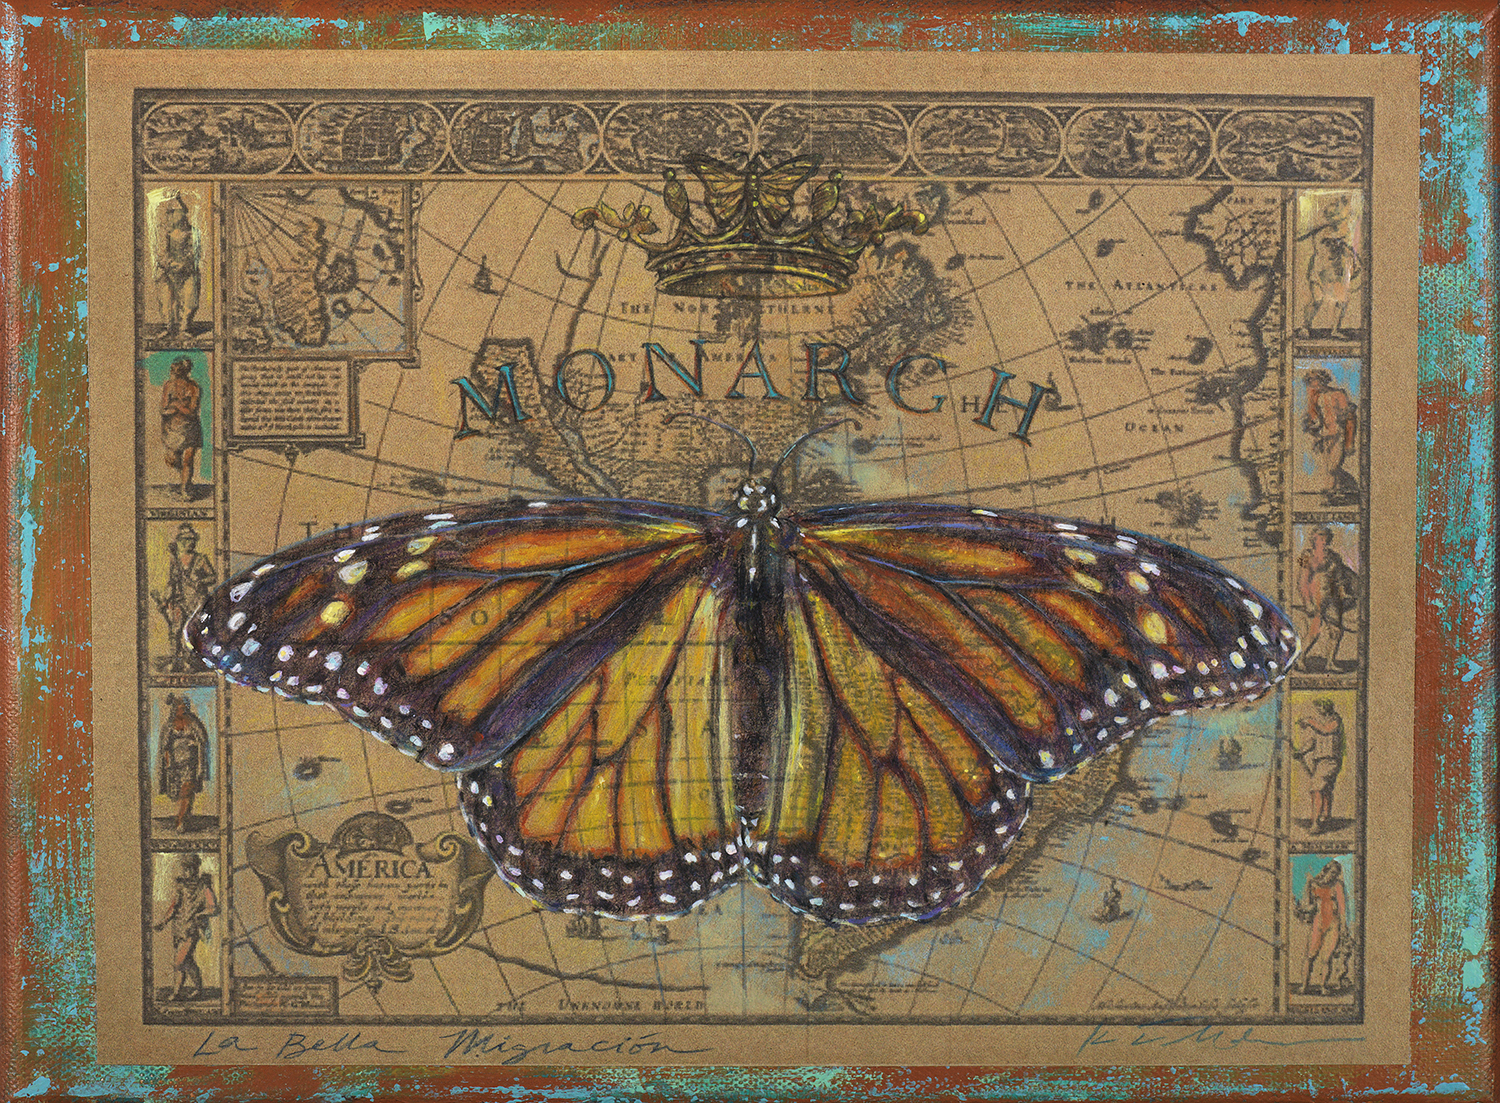 Monarch, mixed media on paper mounted on canvas, 12”x9”